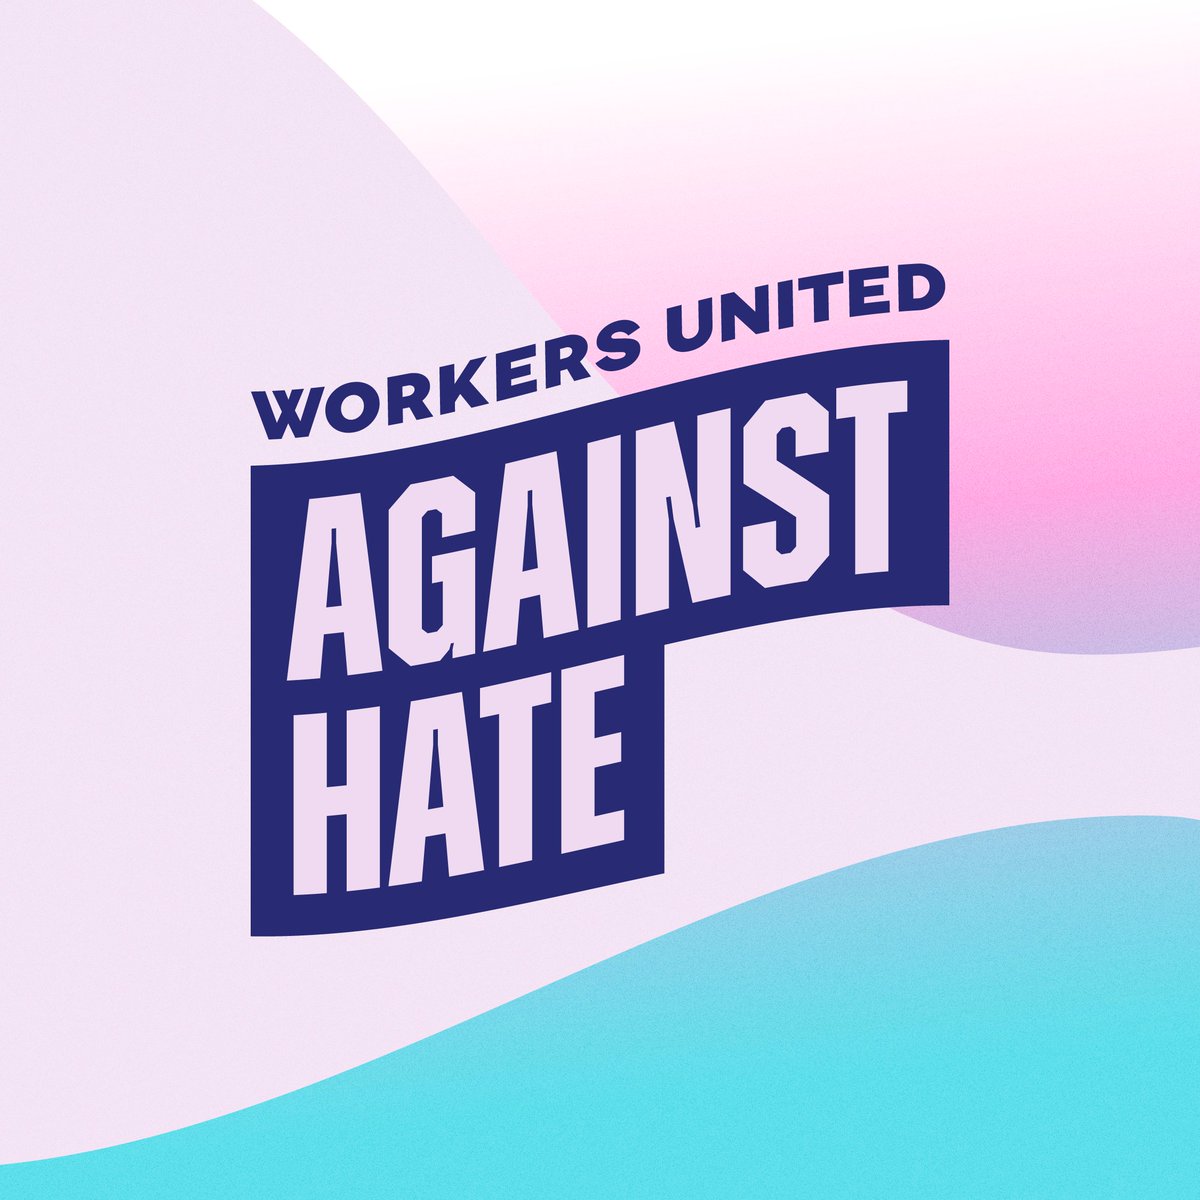 CUPW and its members recognize #IDAHOBIT by demanding that all parties take action to eliminate harassment and violence against 2SLGTBQI+ workers. Ending harassment and violence at work is a collective responsibility. Let’s unite against hate.